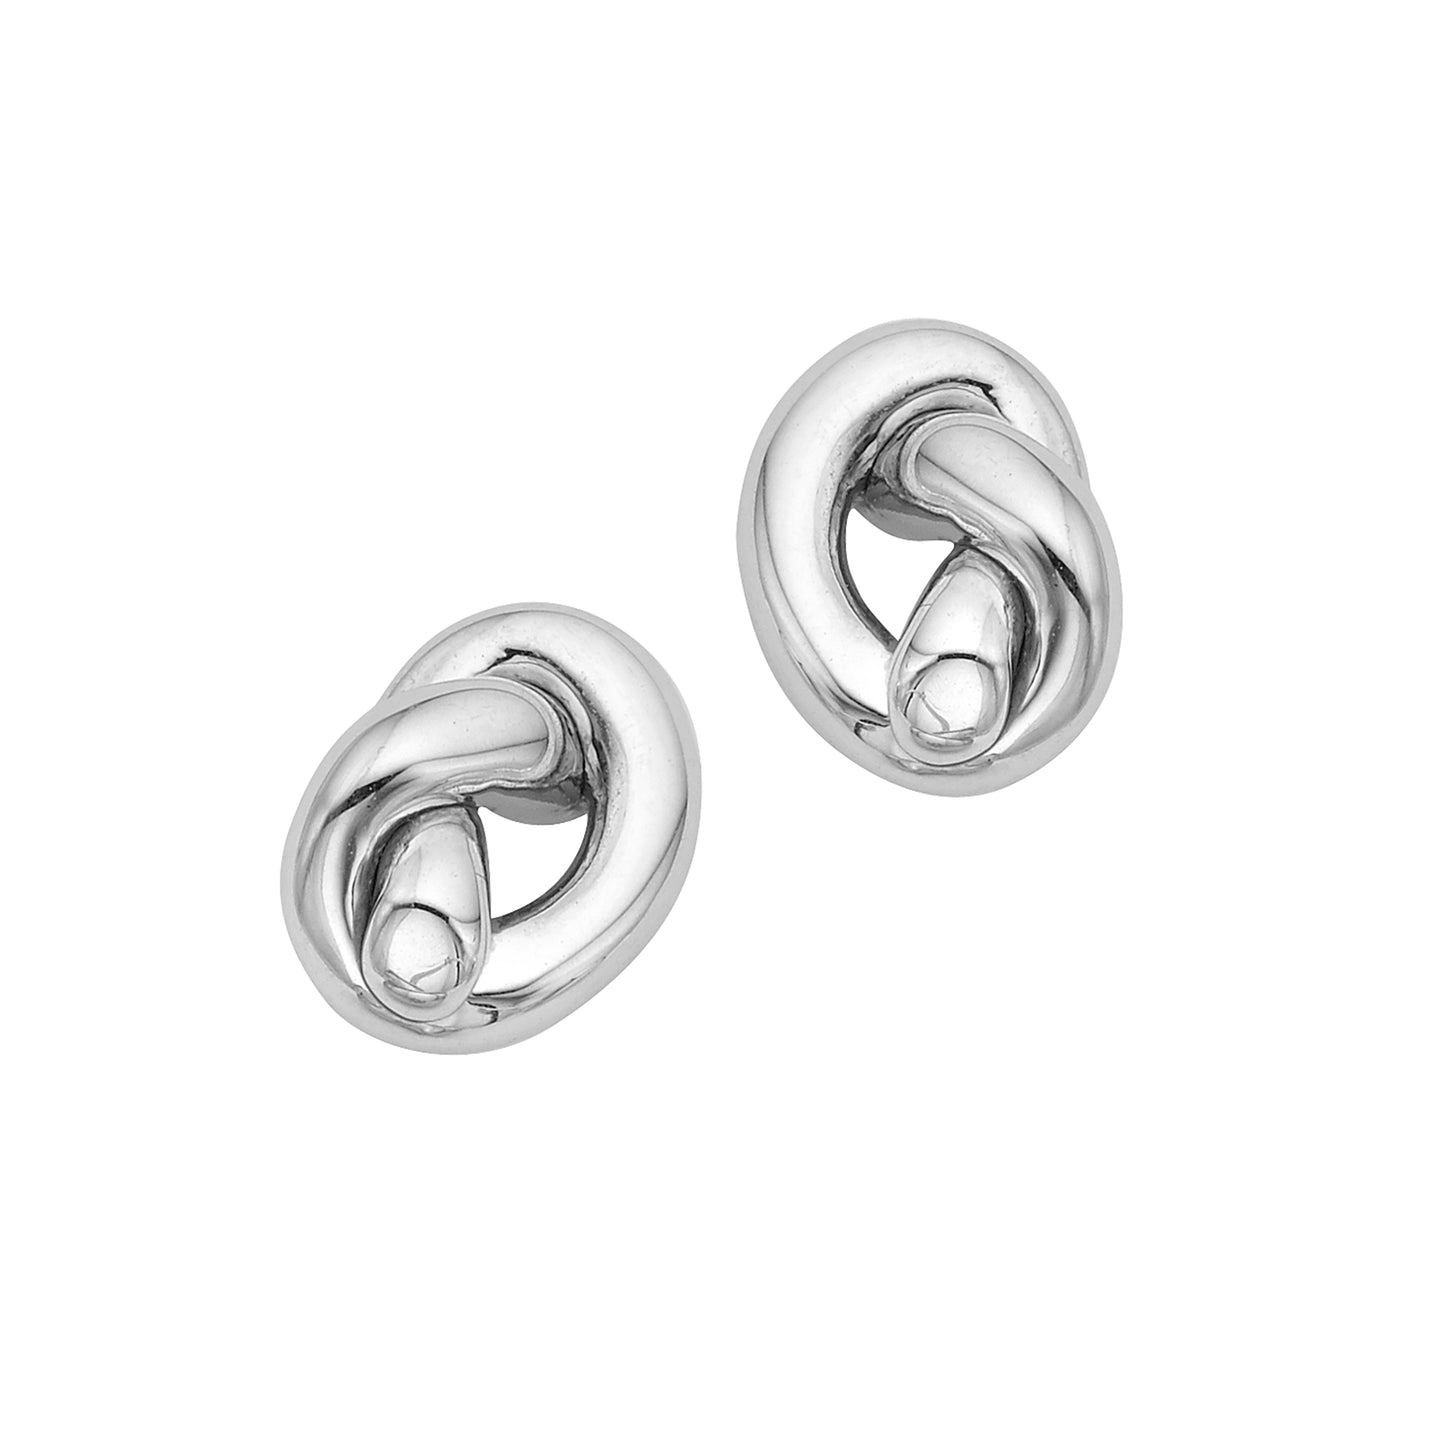 14K Puffed Amore Love Knot Studs